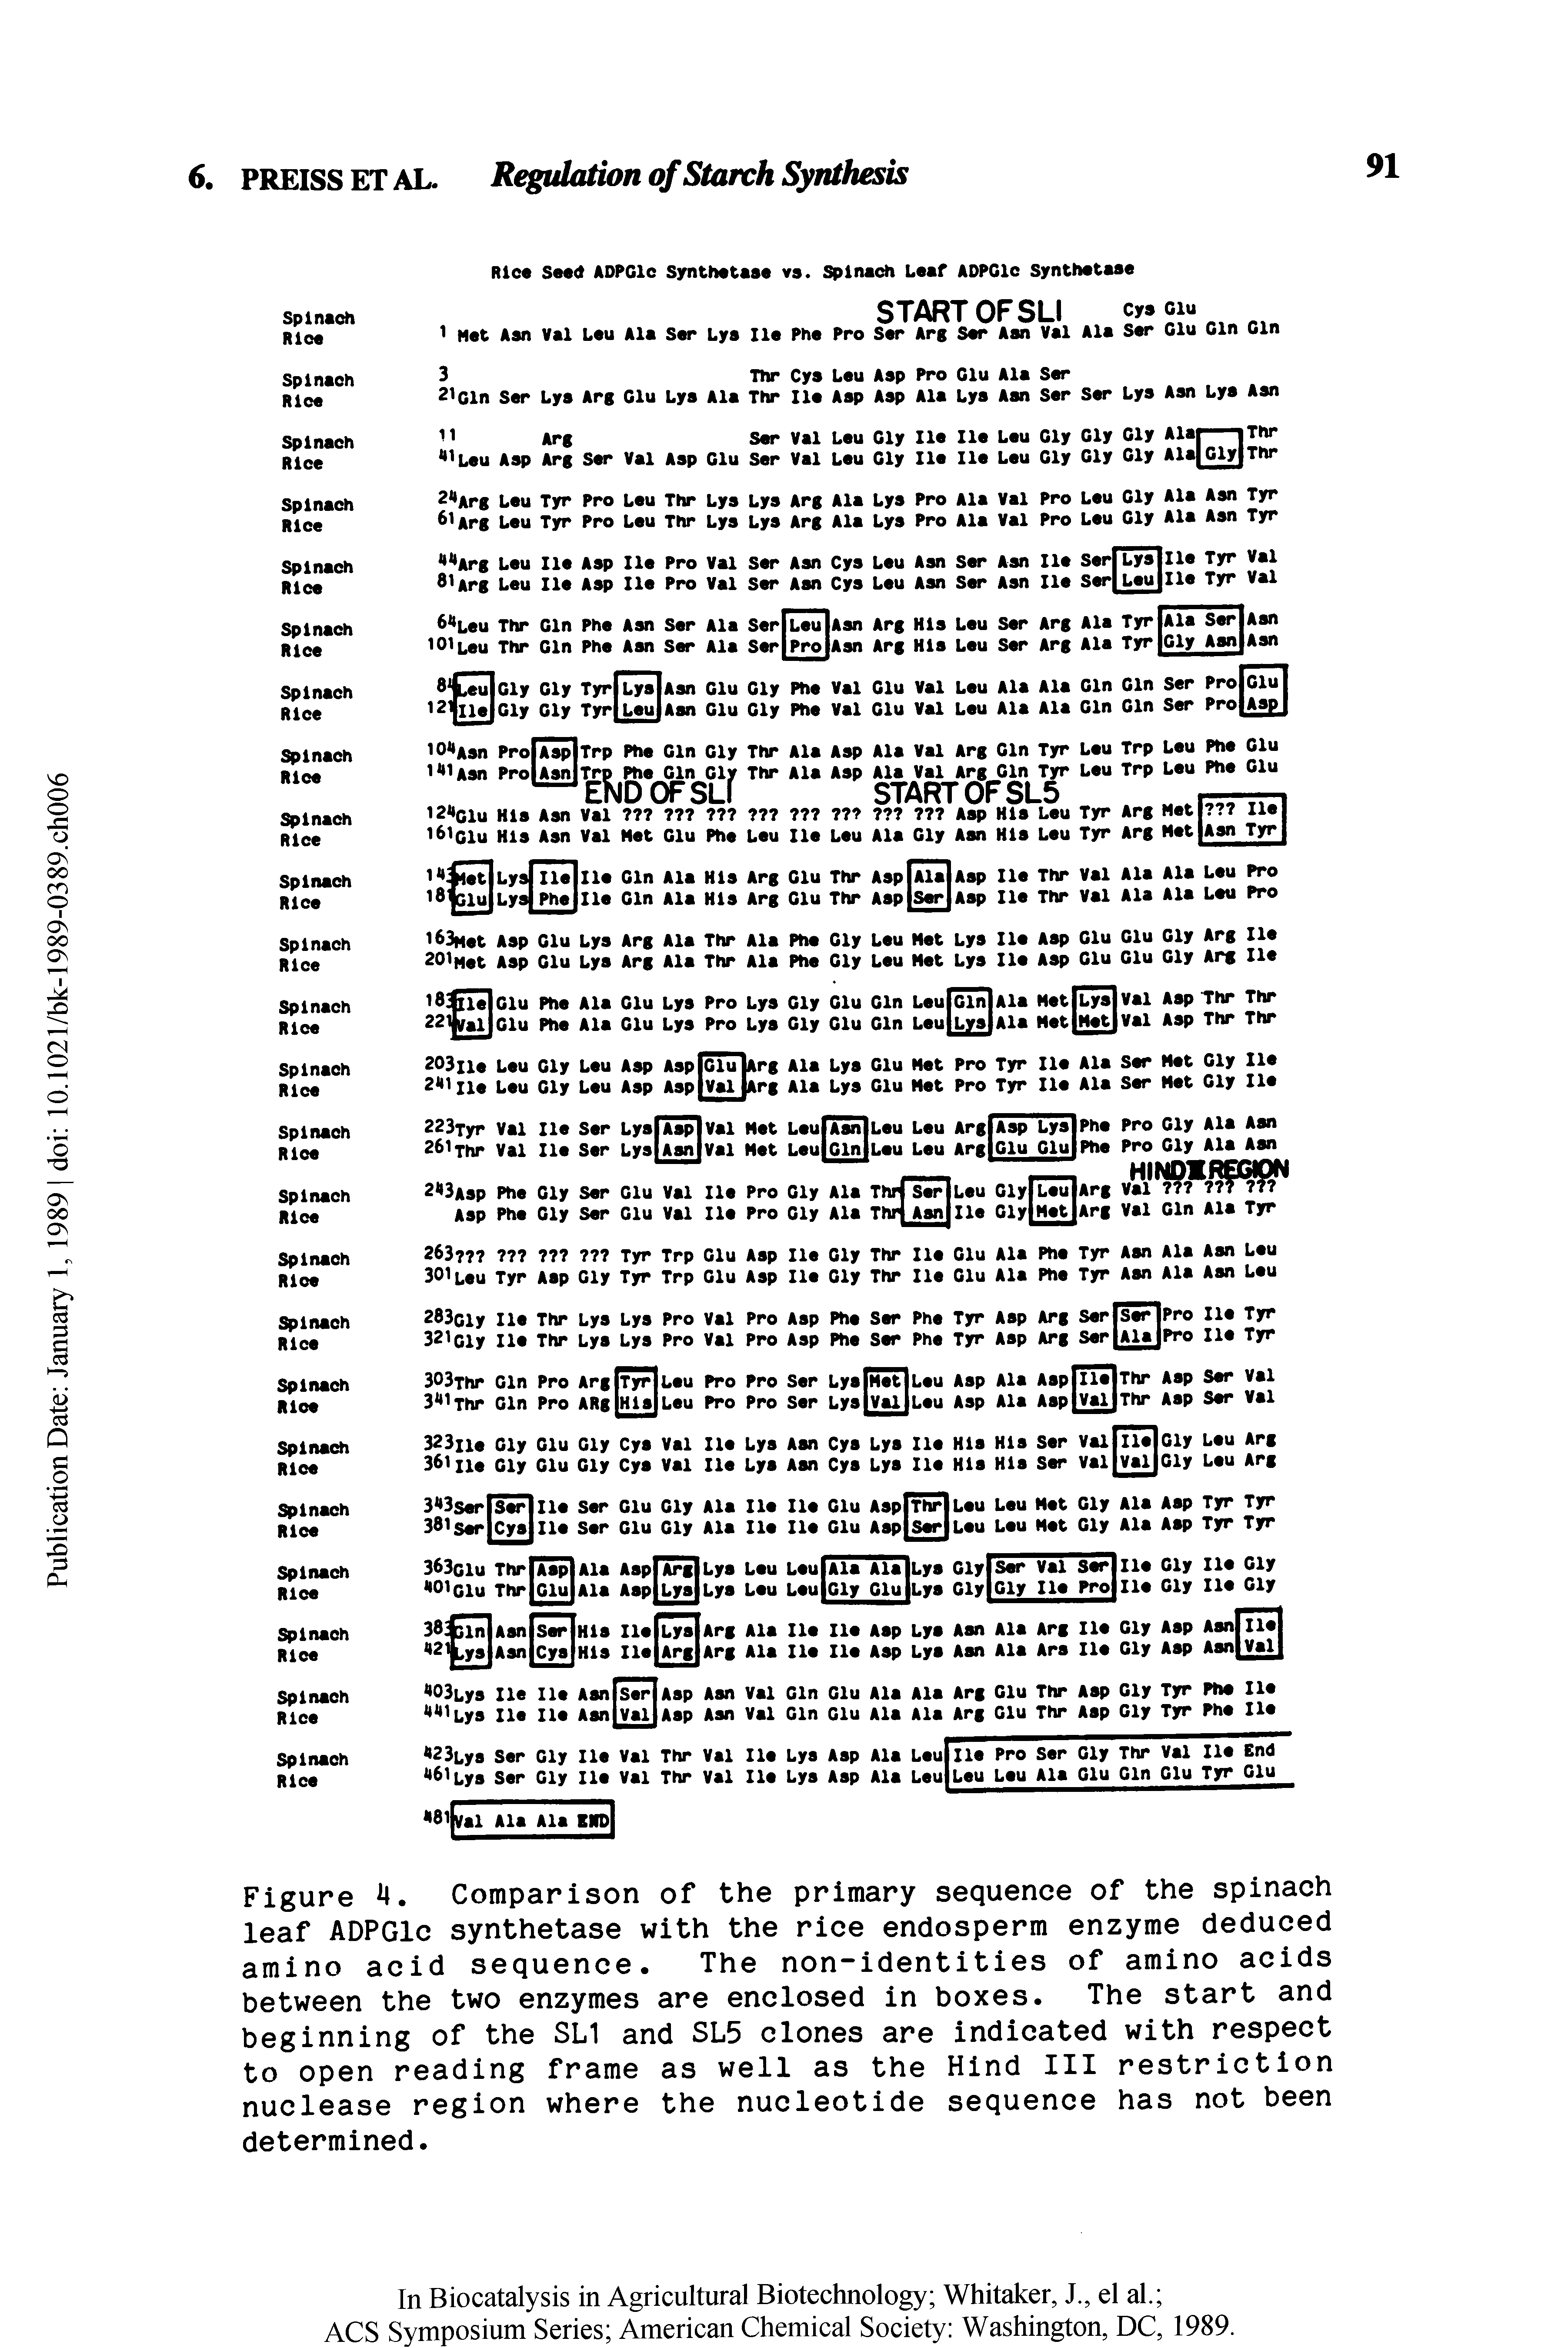 Figure M. Comparison of the primary sequence of the spinach leaf ADPGlc synthetase with the rice endosperm enzyme deduced amino acid sequence. The non-identities of amino acids between the two enzymes are enclosed in boxes. The start and beginning of the SL1 and SL5 clones are indicated with respect to open reading frame as well as the Hind III restriction nuclease region where the nucleotide sequence has not been determined.